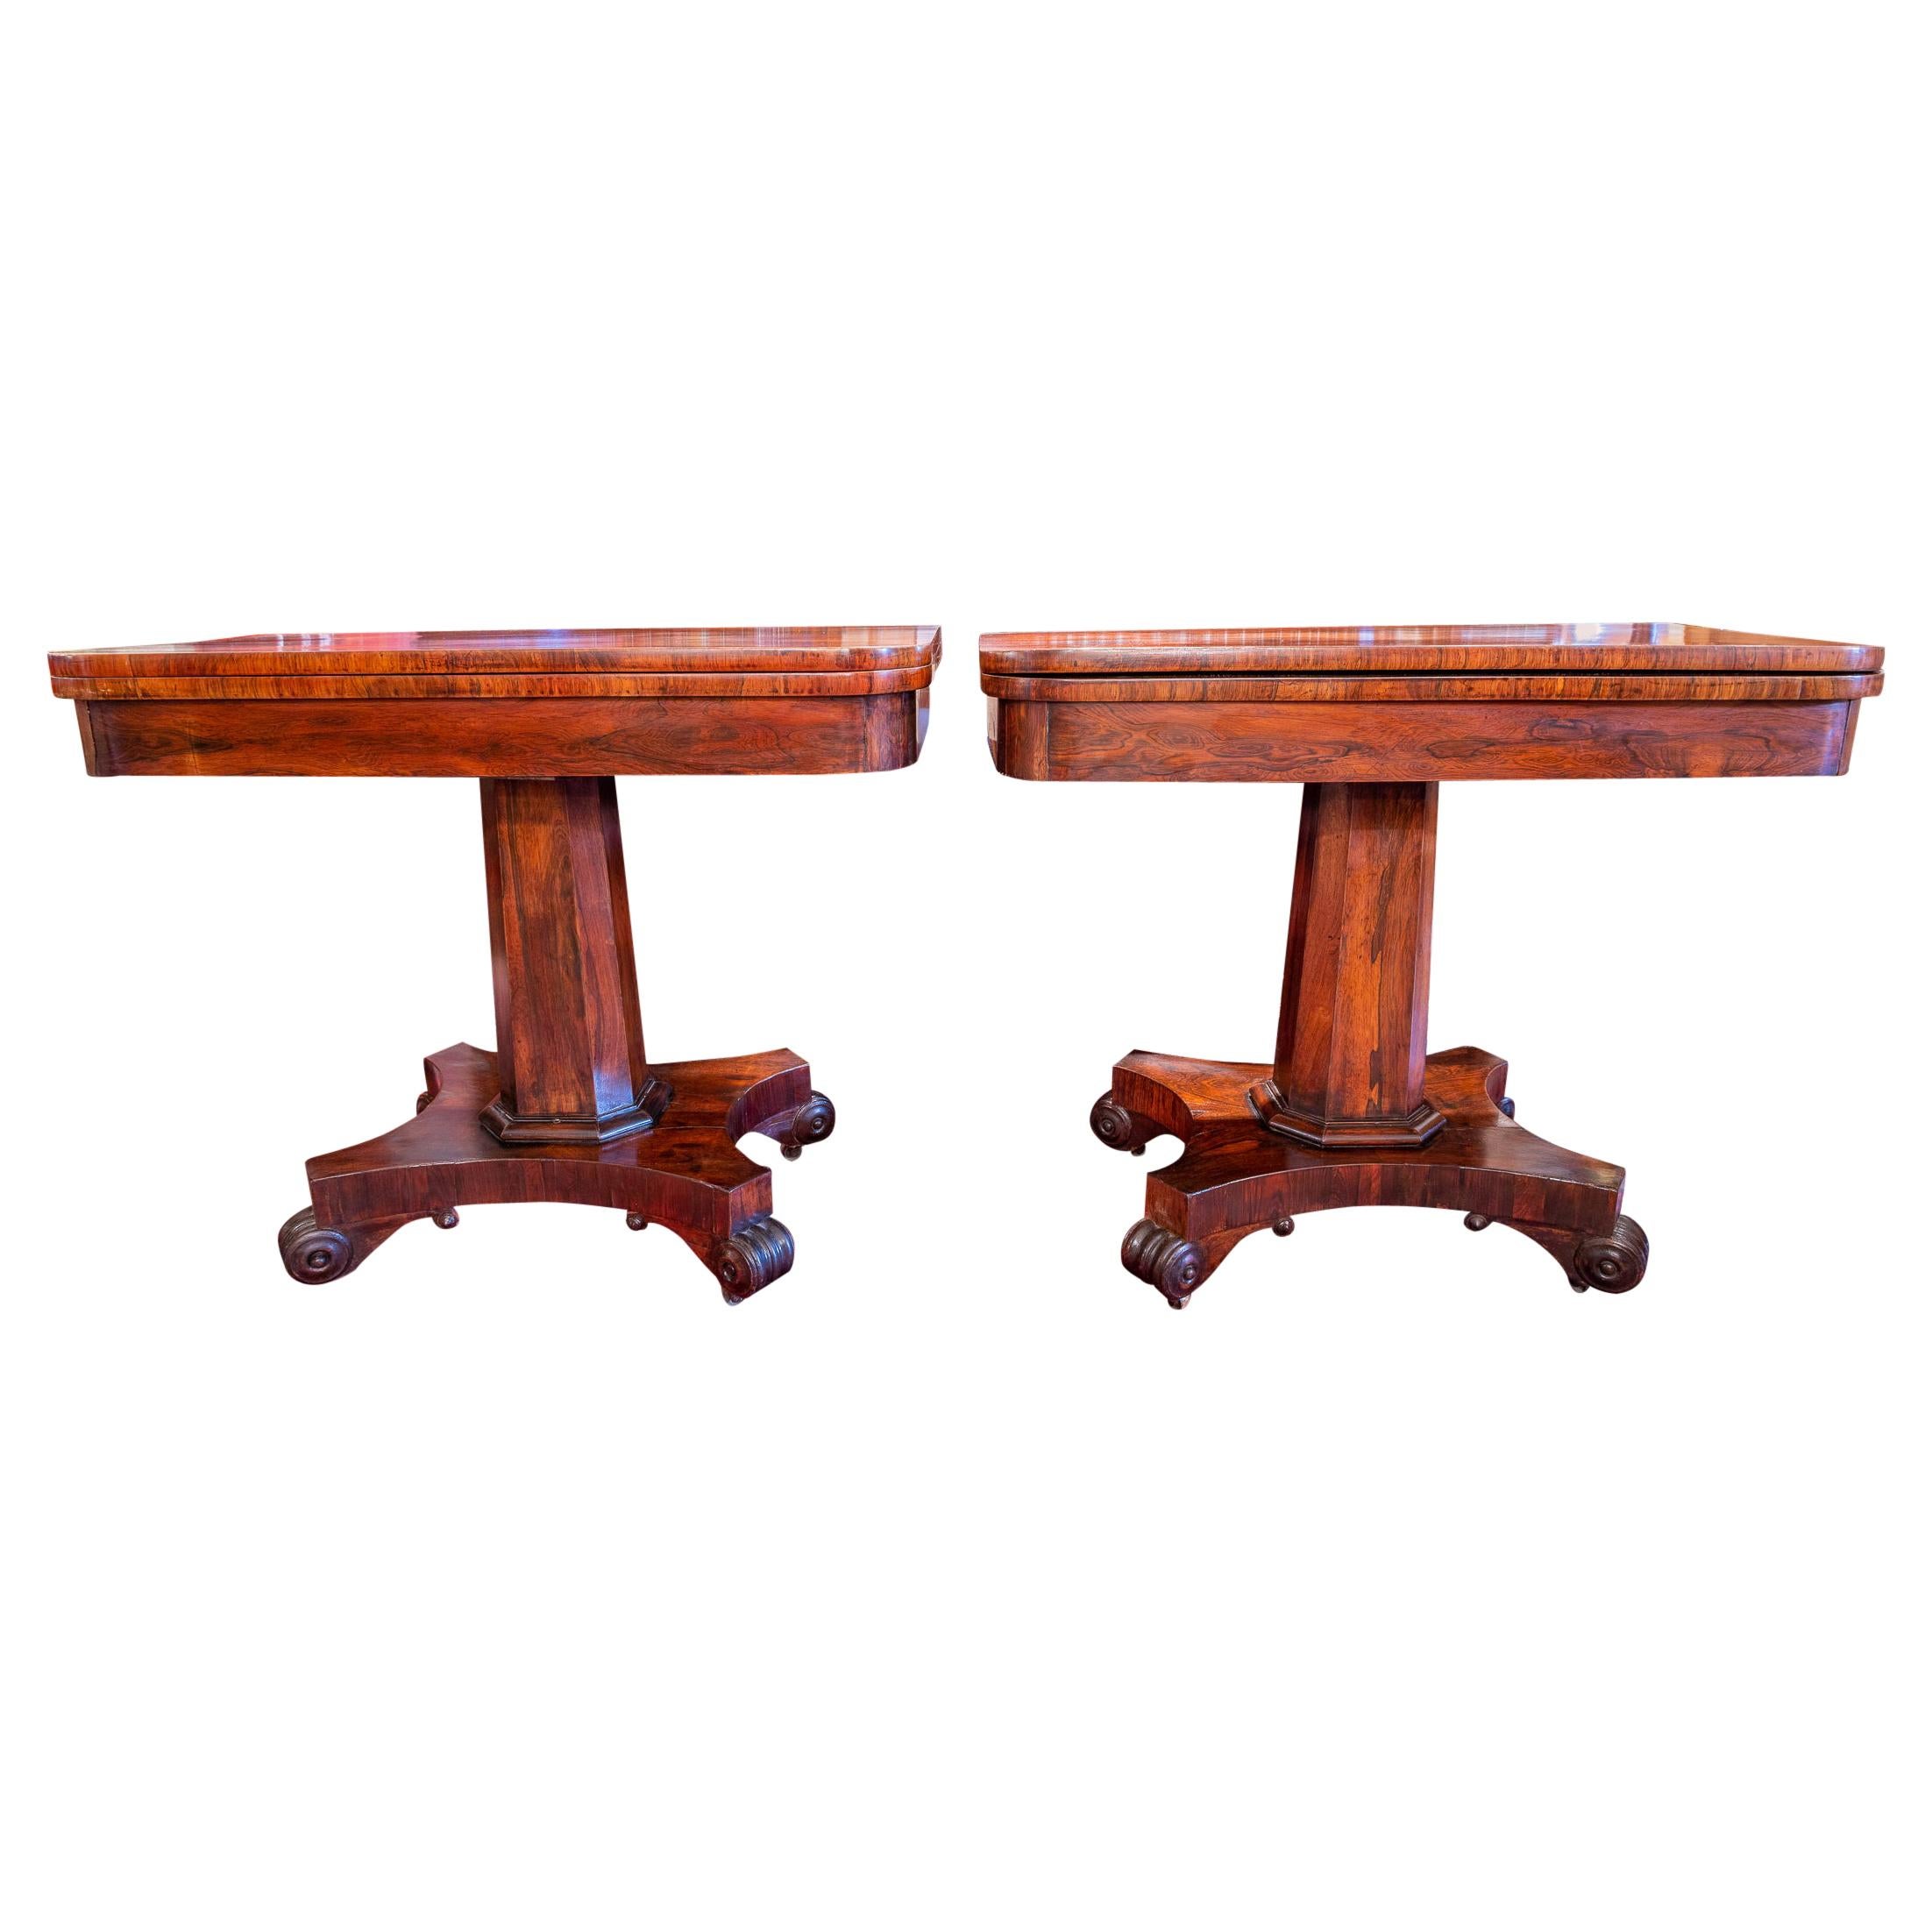 Fine Pair of Regency Period Rosewood Games Tables, Signed Phenes & Williamson